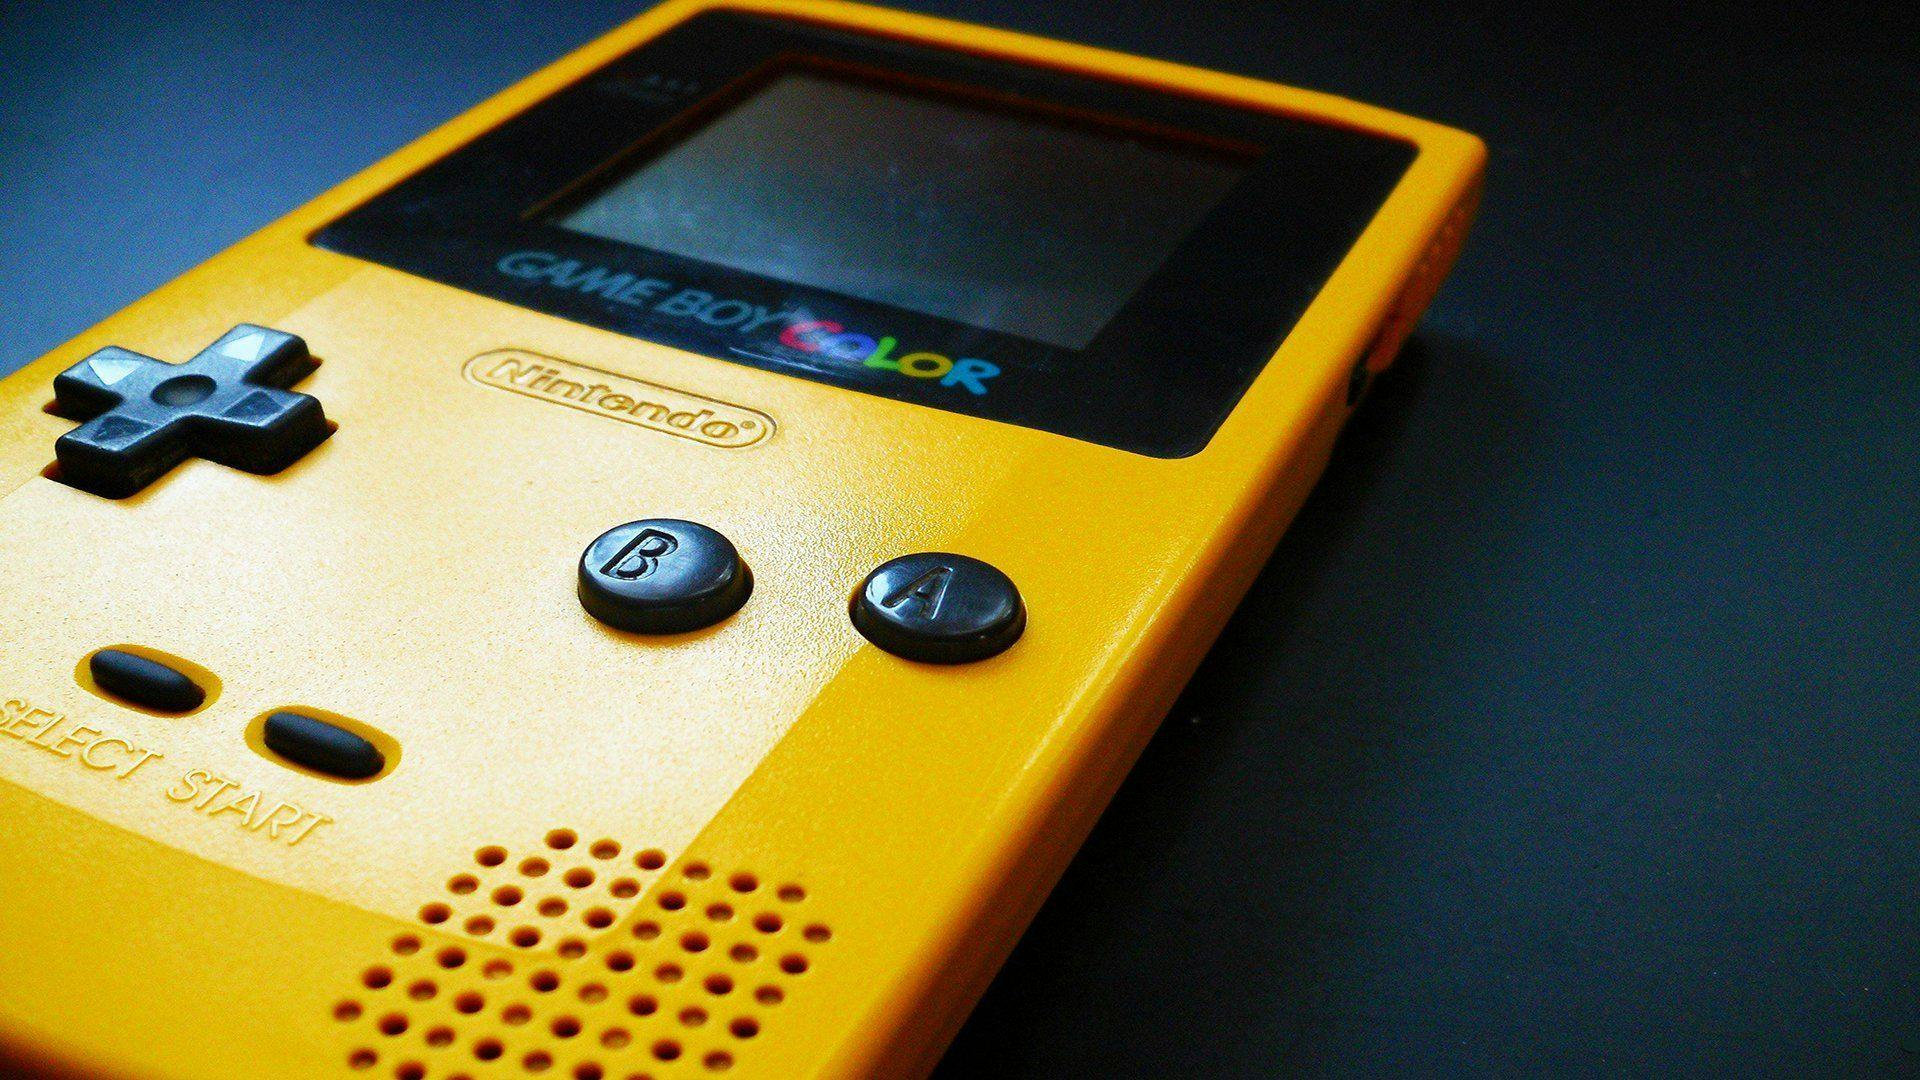 /10-best-game-boy-color-games-ranked-by-sales-z4r37hp feature image